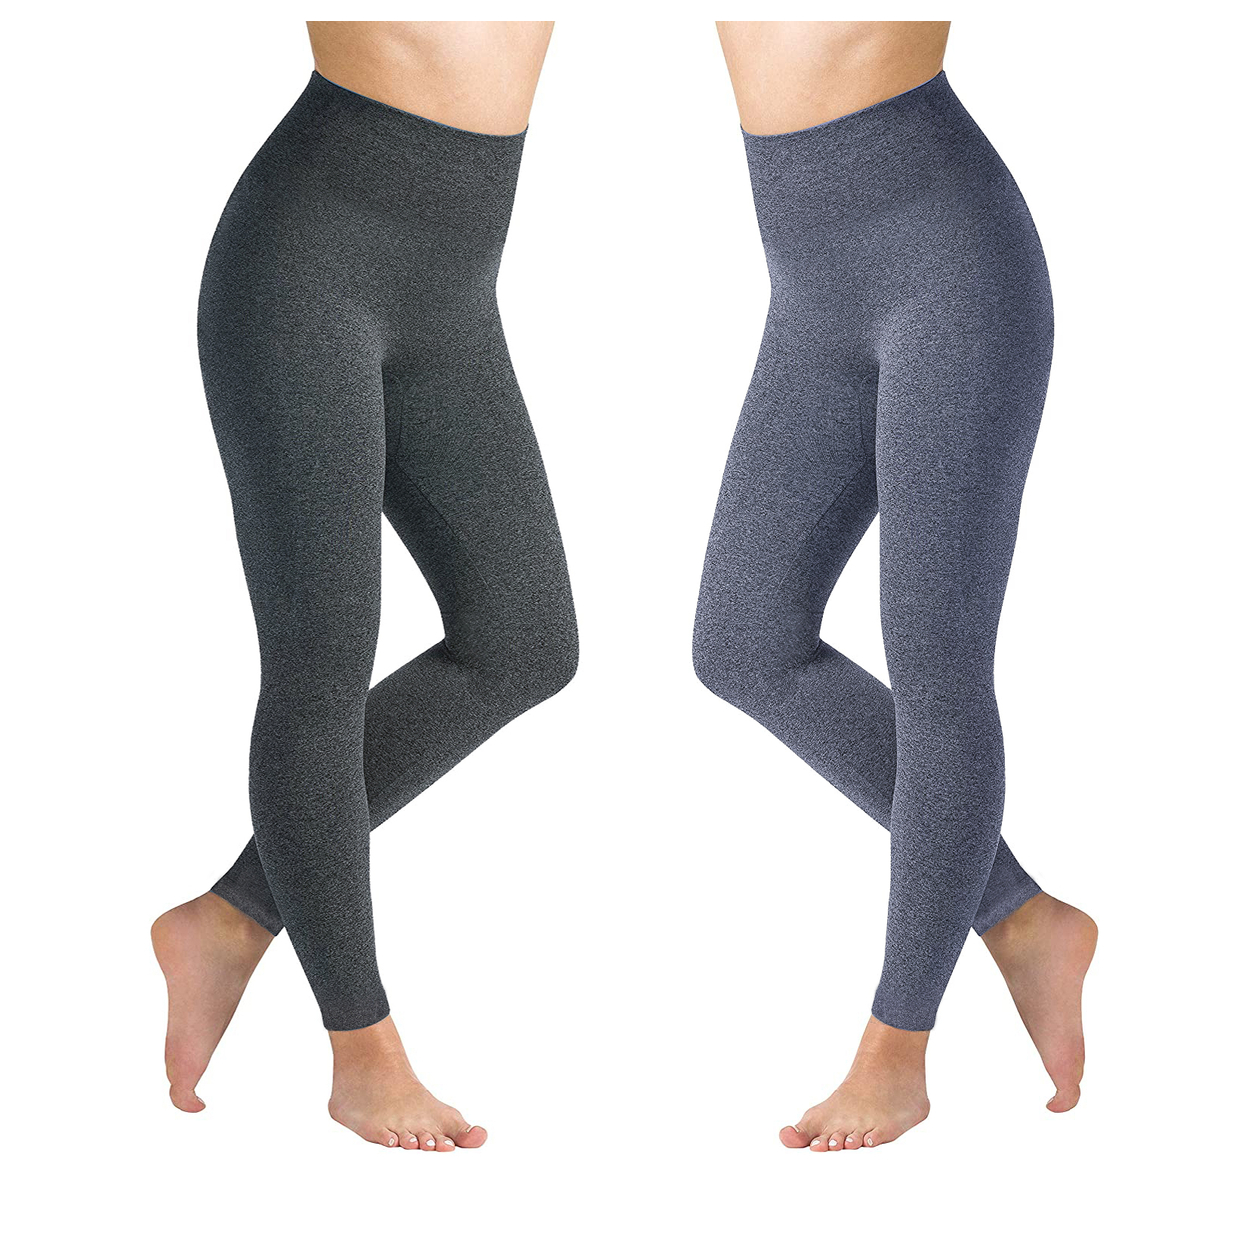 2-Pack: Women's High Waisted Ultra Soft Fleece Lined Warm Marled Leggings(Available In Plus Sizes) - Charcoal & Navy, Medium